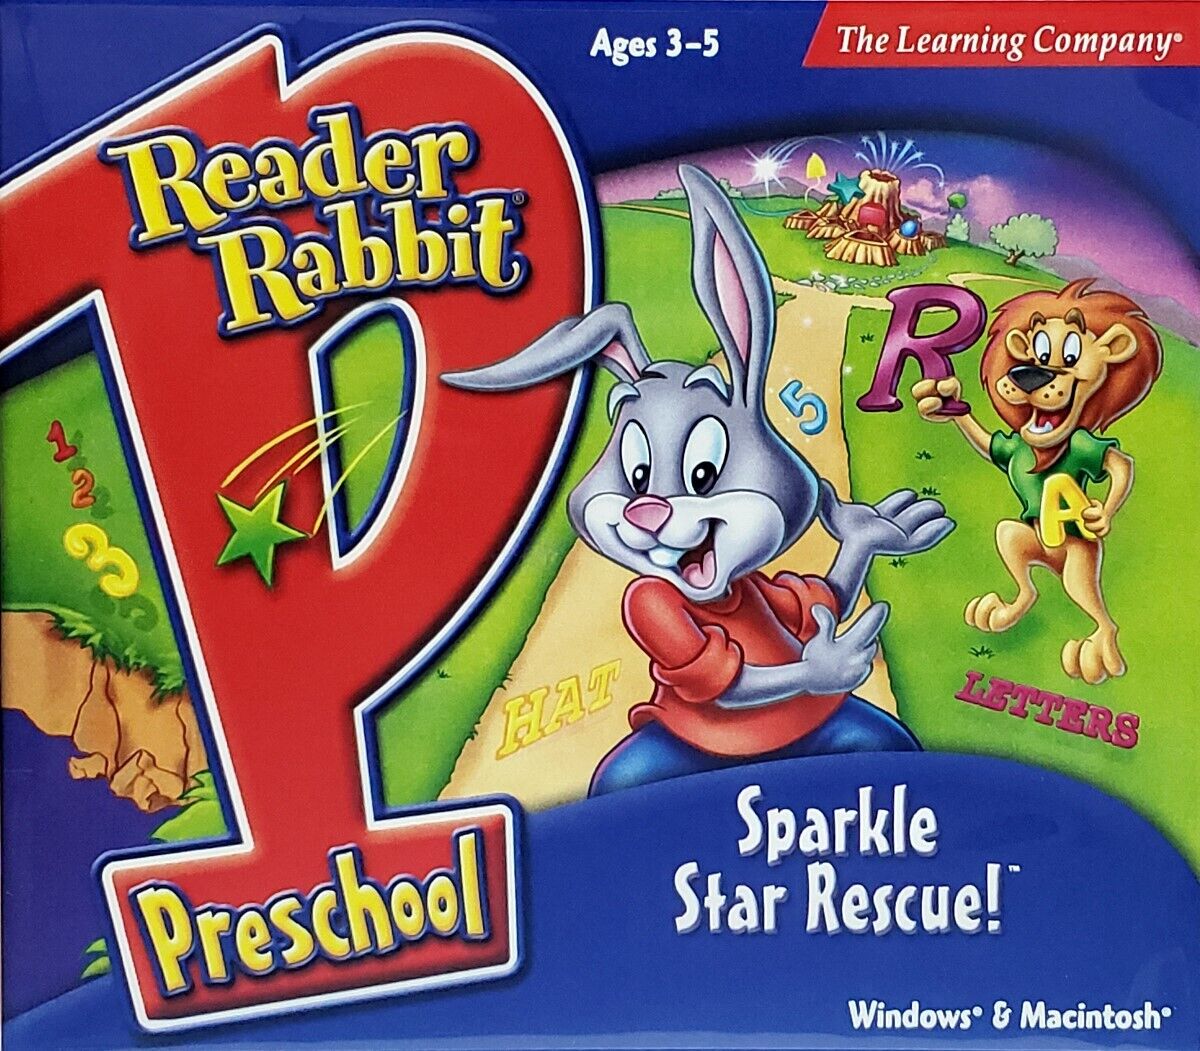 Reader Rabbit Preschool Sparkle Star Rescue Ages 3-5 Learning Company New Sealed